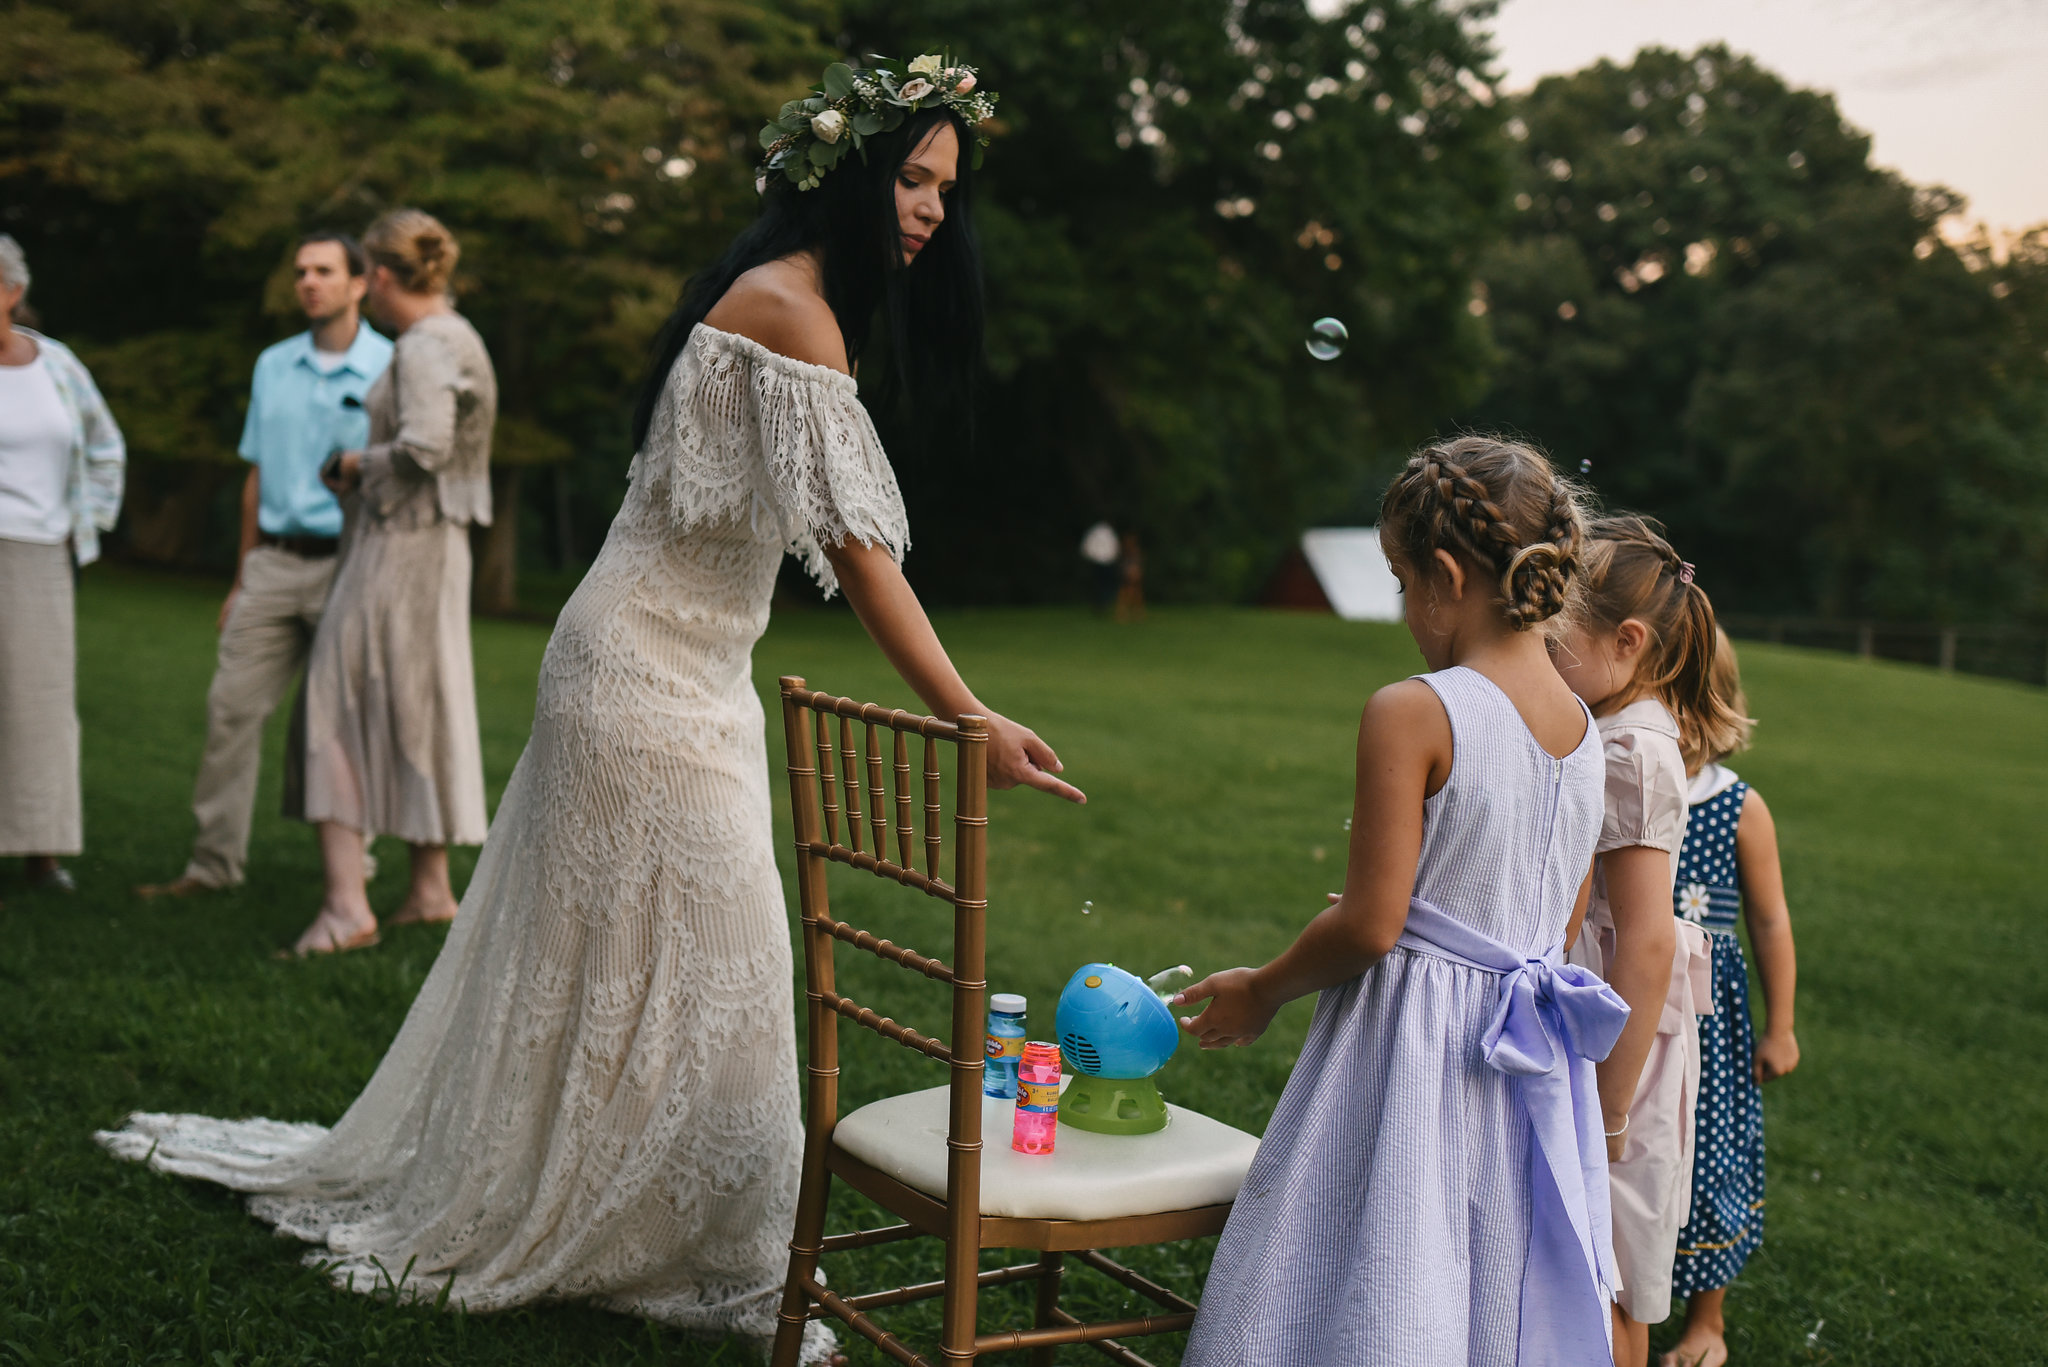  Maryland, Eastern Shore, Baltimore Wedding Photographer, Romantic, Boho, Backyard Wedding, Nature, Bride Playing with Kids at Reception, Daughters of Simone Lace Wedding Dress, Flower Crown 